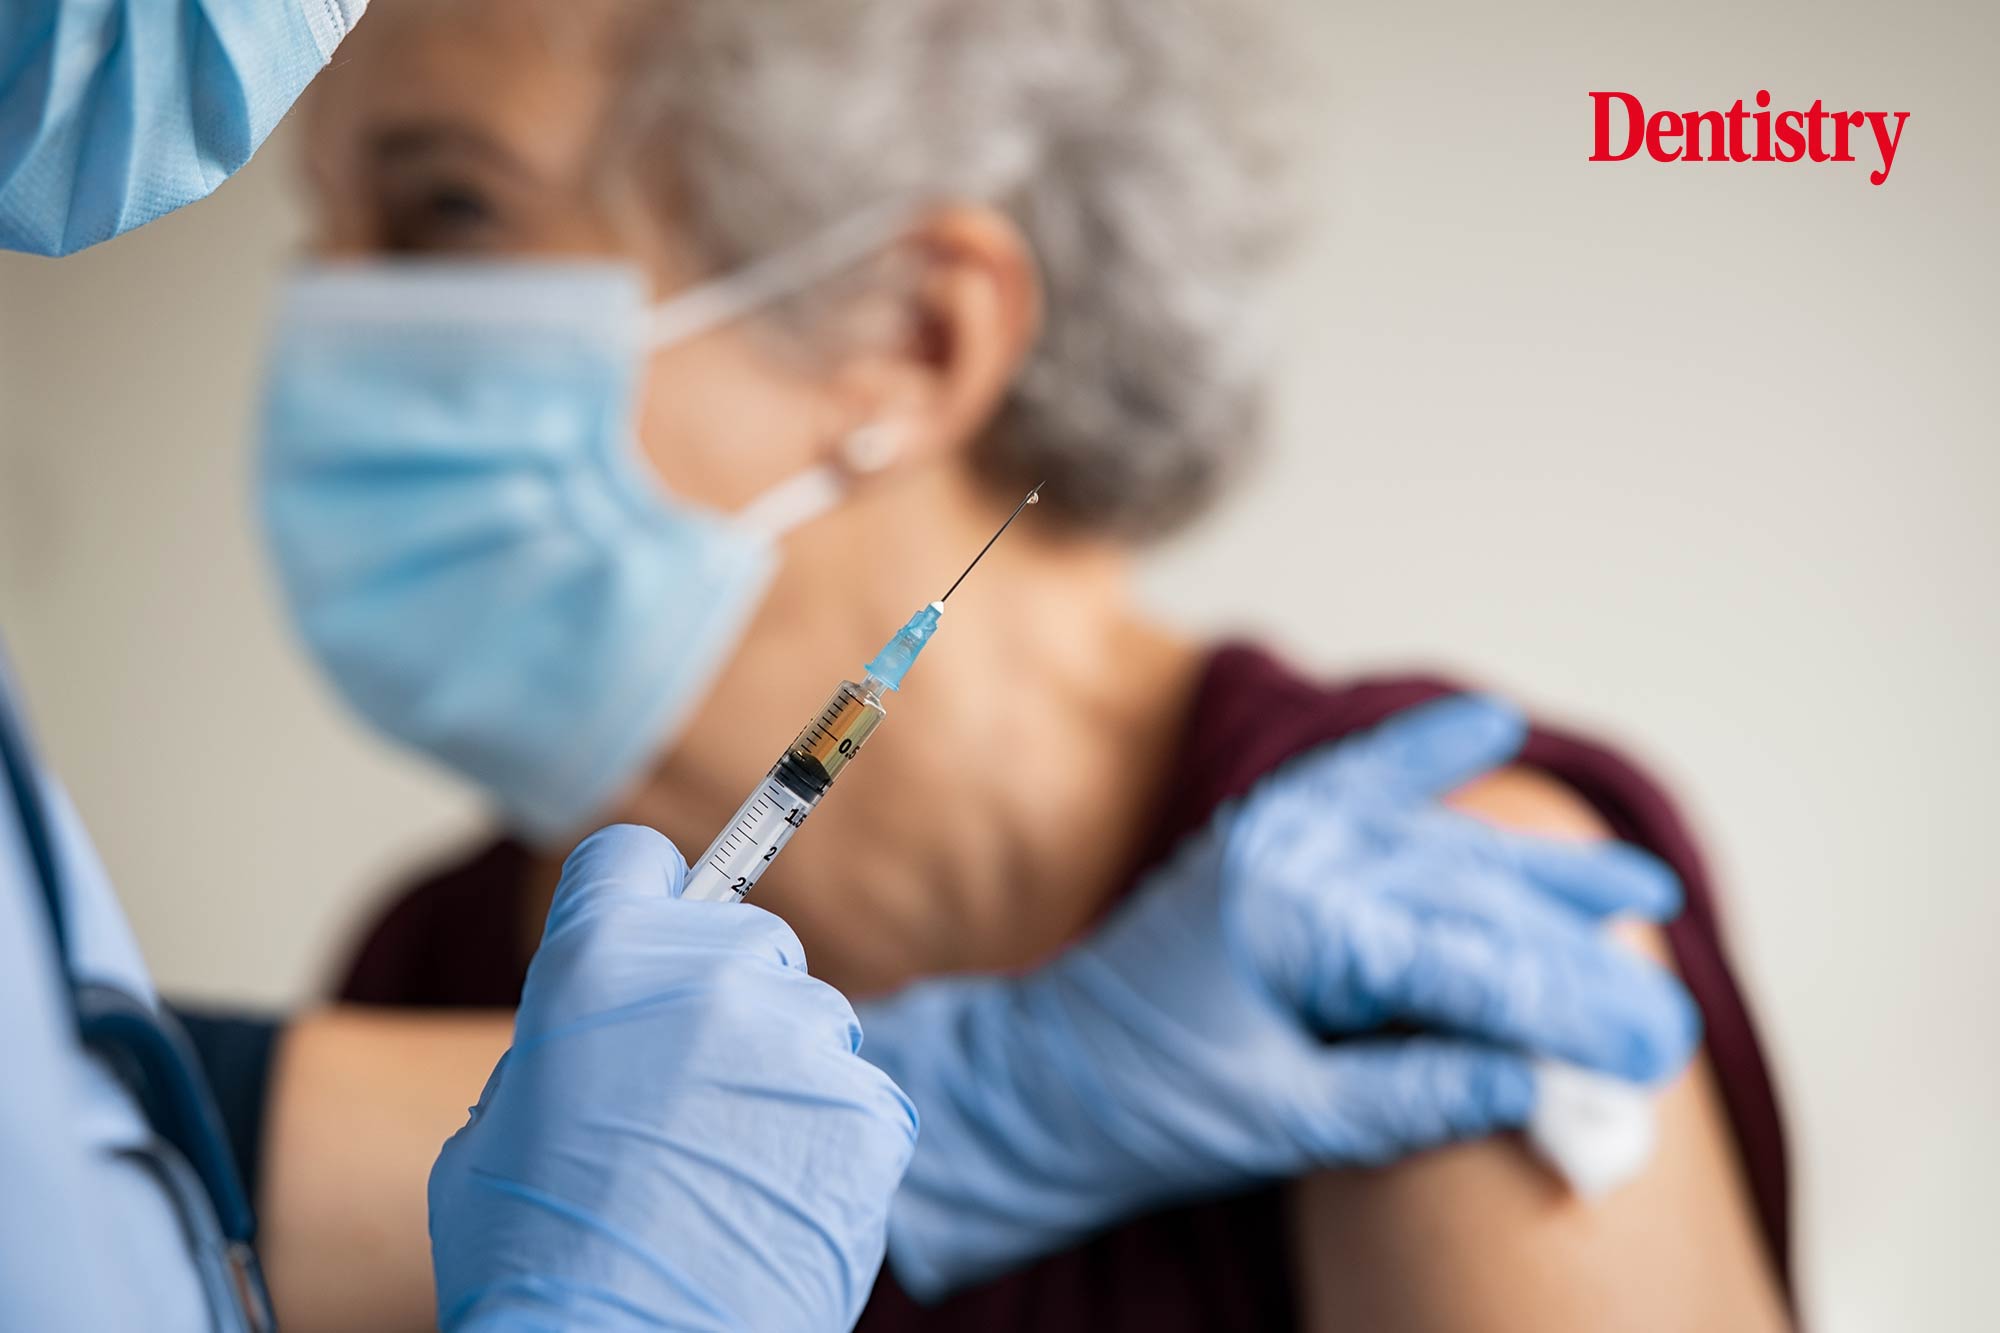 Dental practices told to stop serving notices of termination to unvaccinated staff